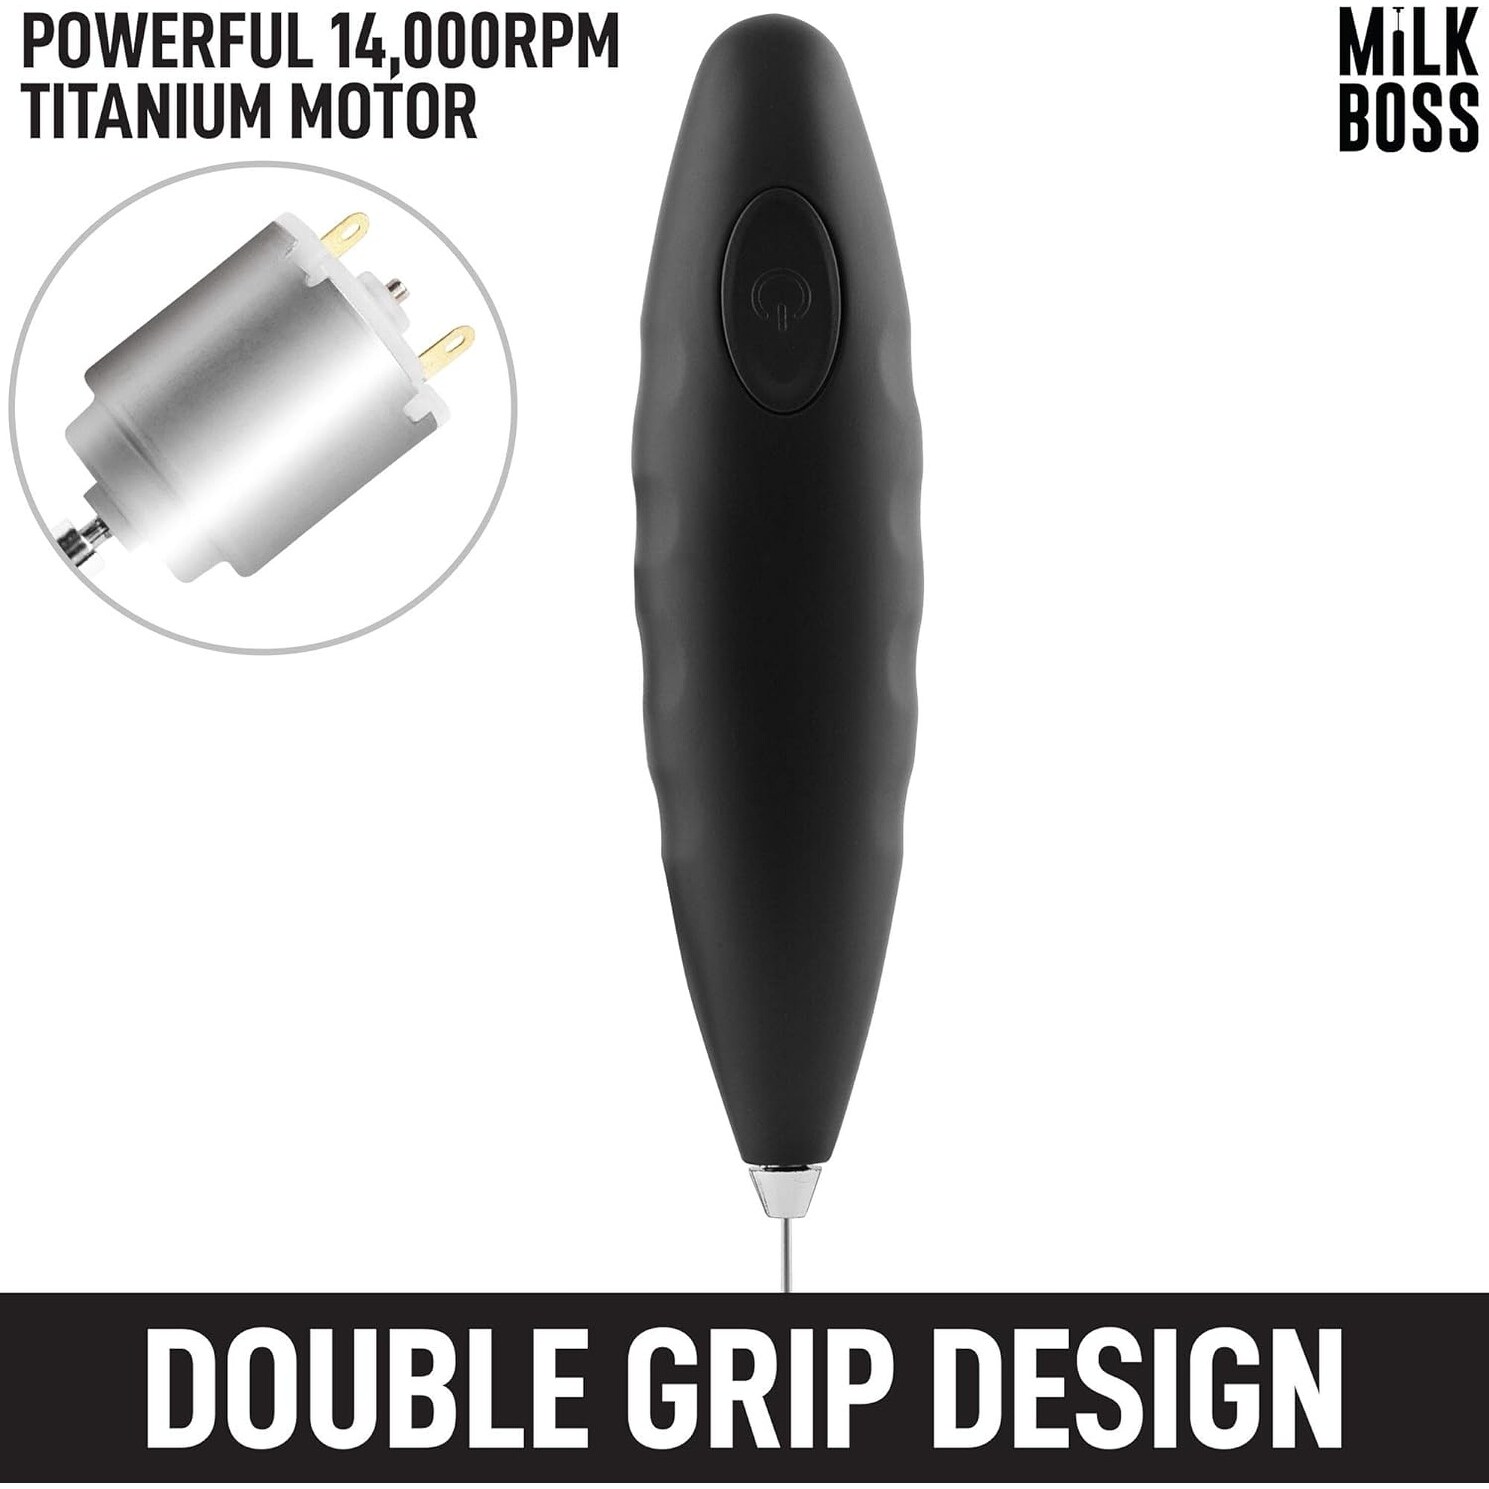 https://ak1.ostkcdn.com/images/products/is/images/direct/6441ce9720f99a889a5c0fd56e4bc86d99c952de/Zulay-Kitchen-Milk-Boss-Double-Grip-Milk-Frother-Handheld.jpg